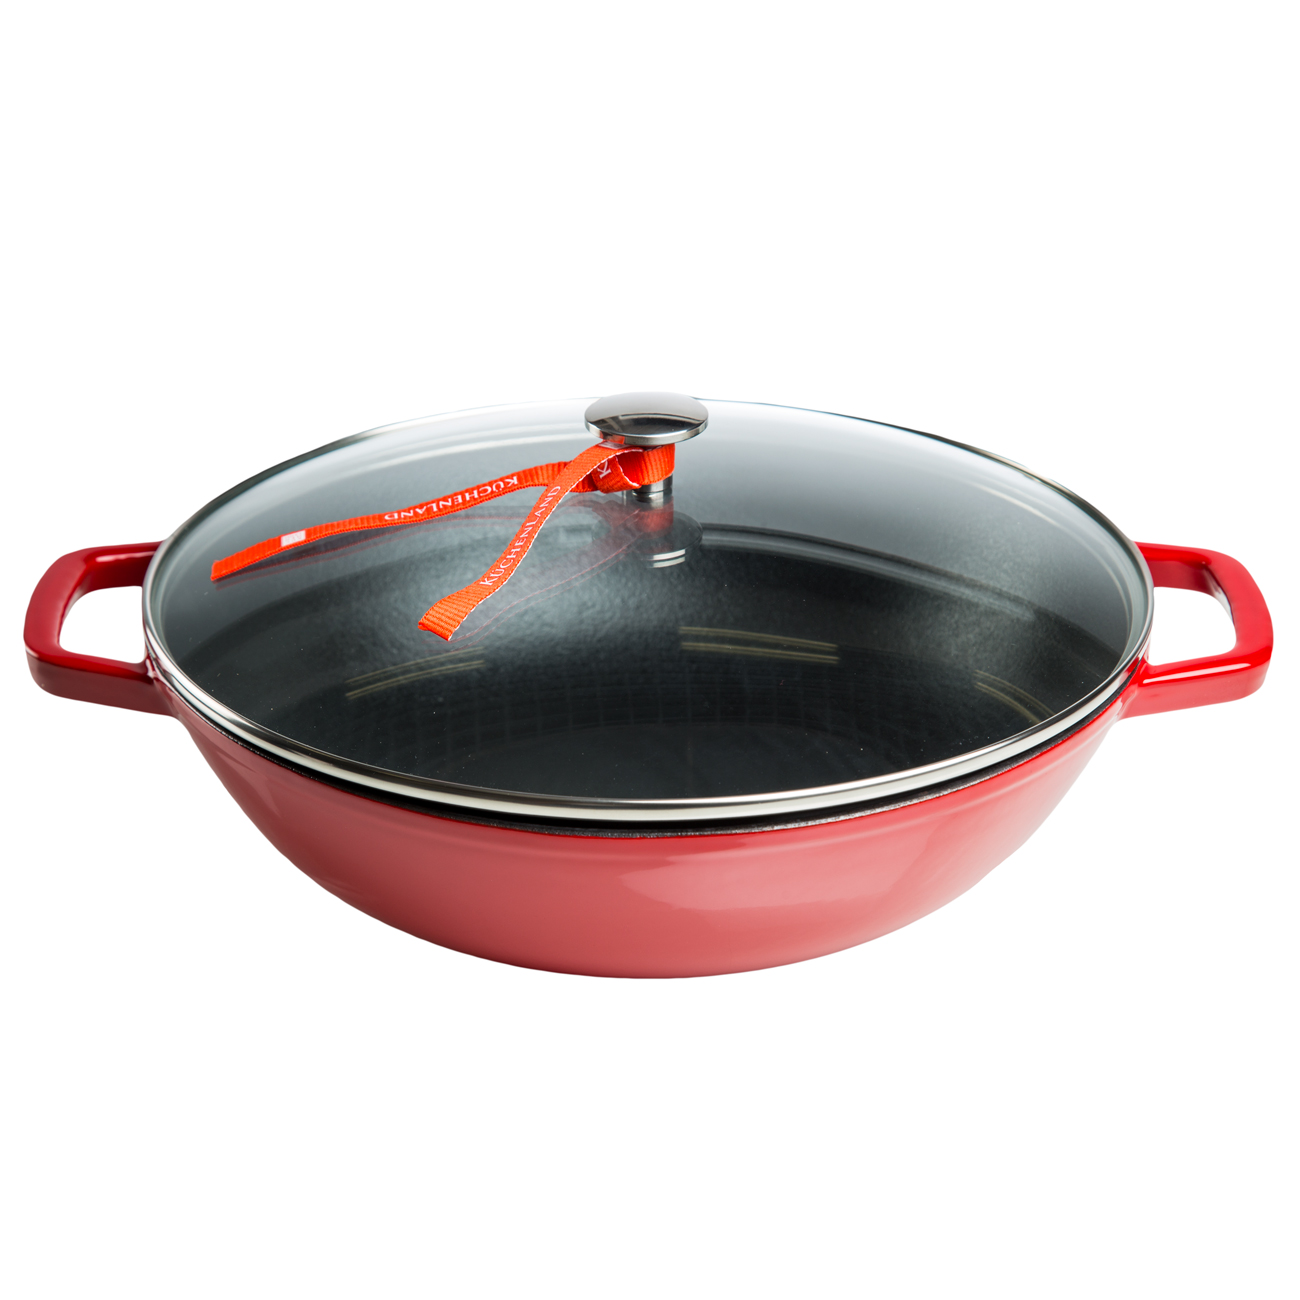 Wok, 31 cm, with lid and grate, cast iron / glass T, red, Bright изображение № 3